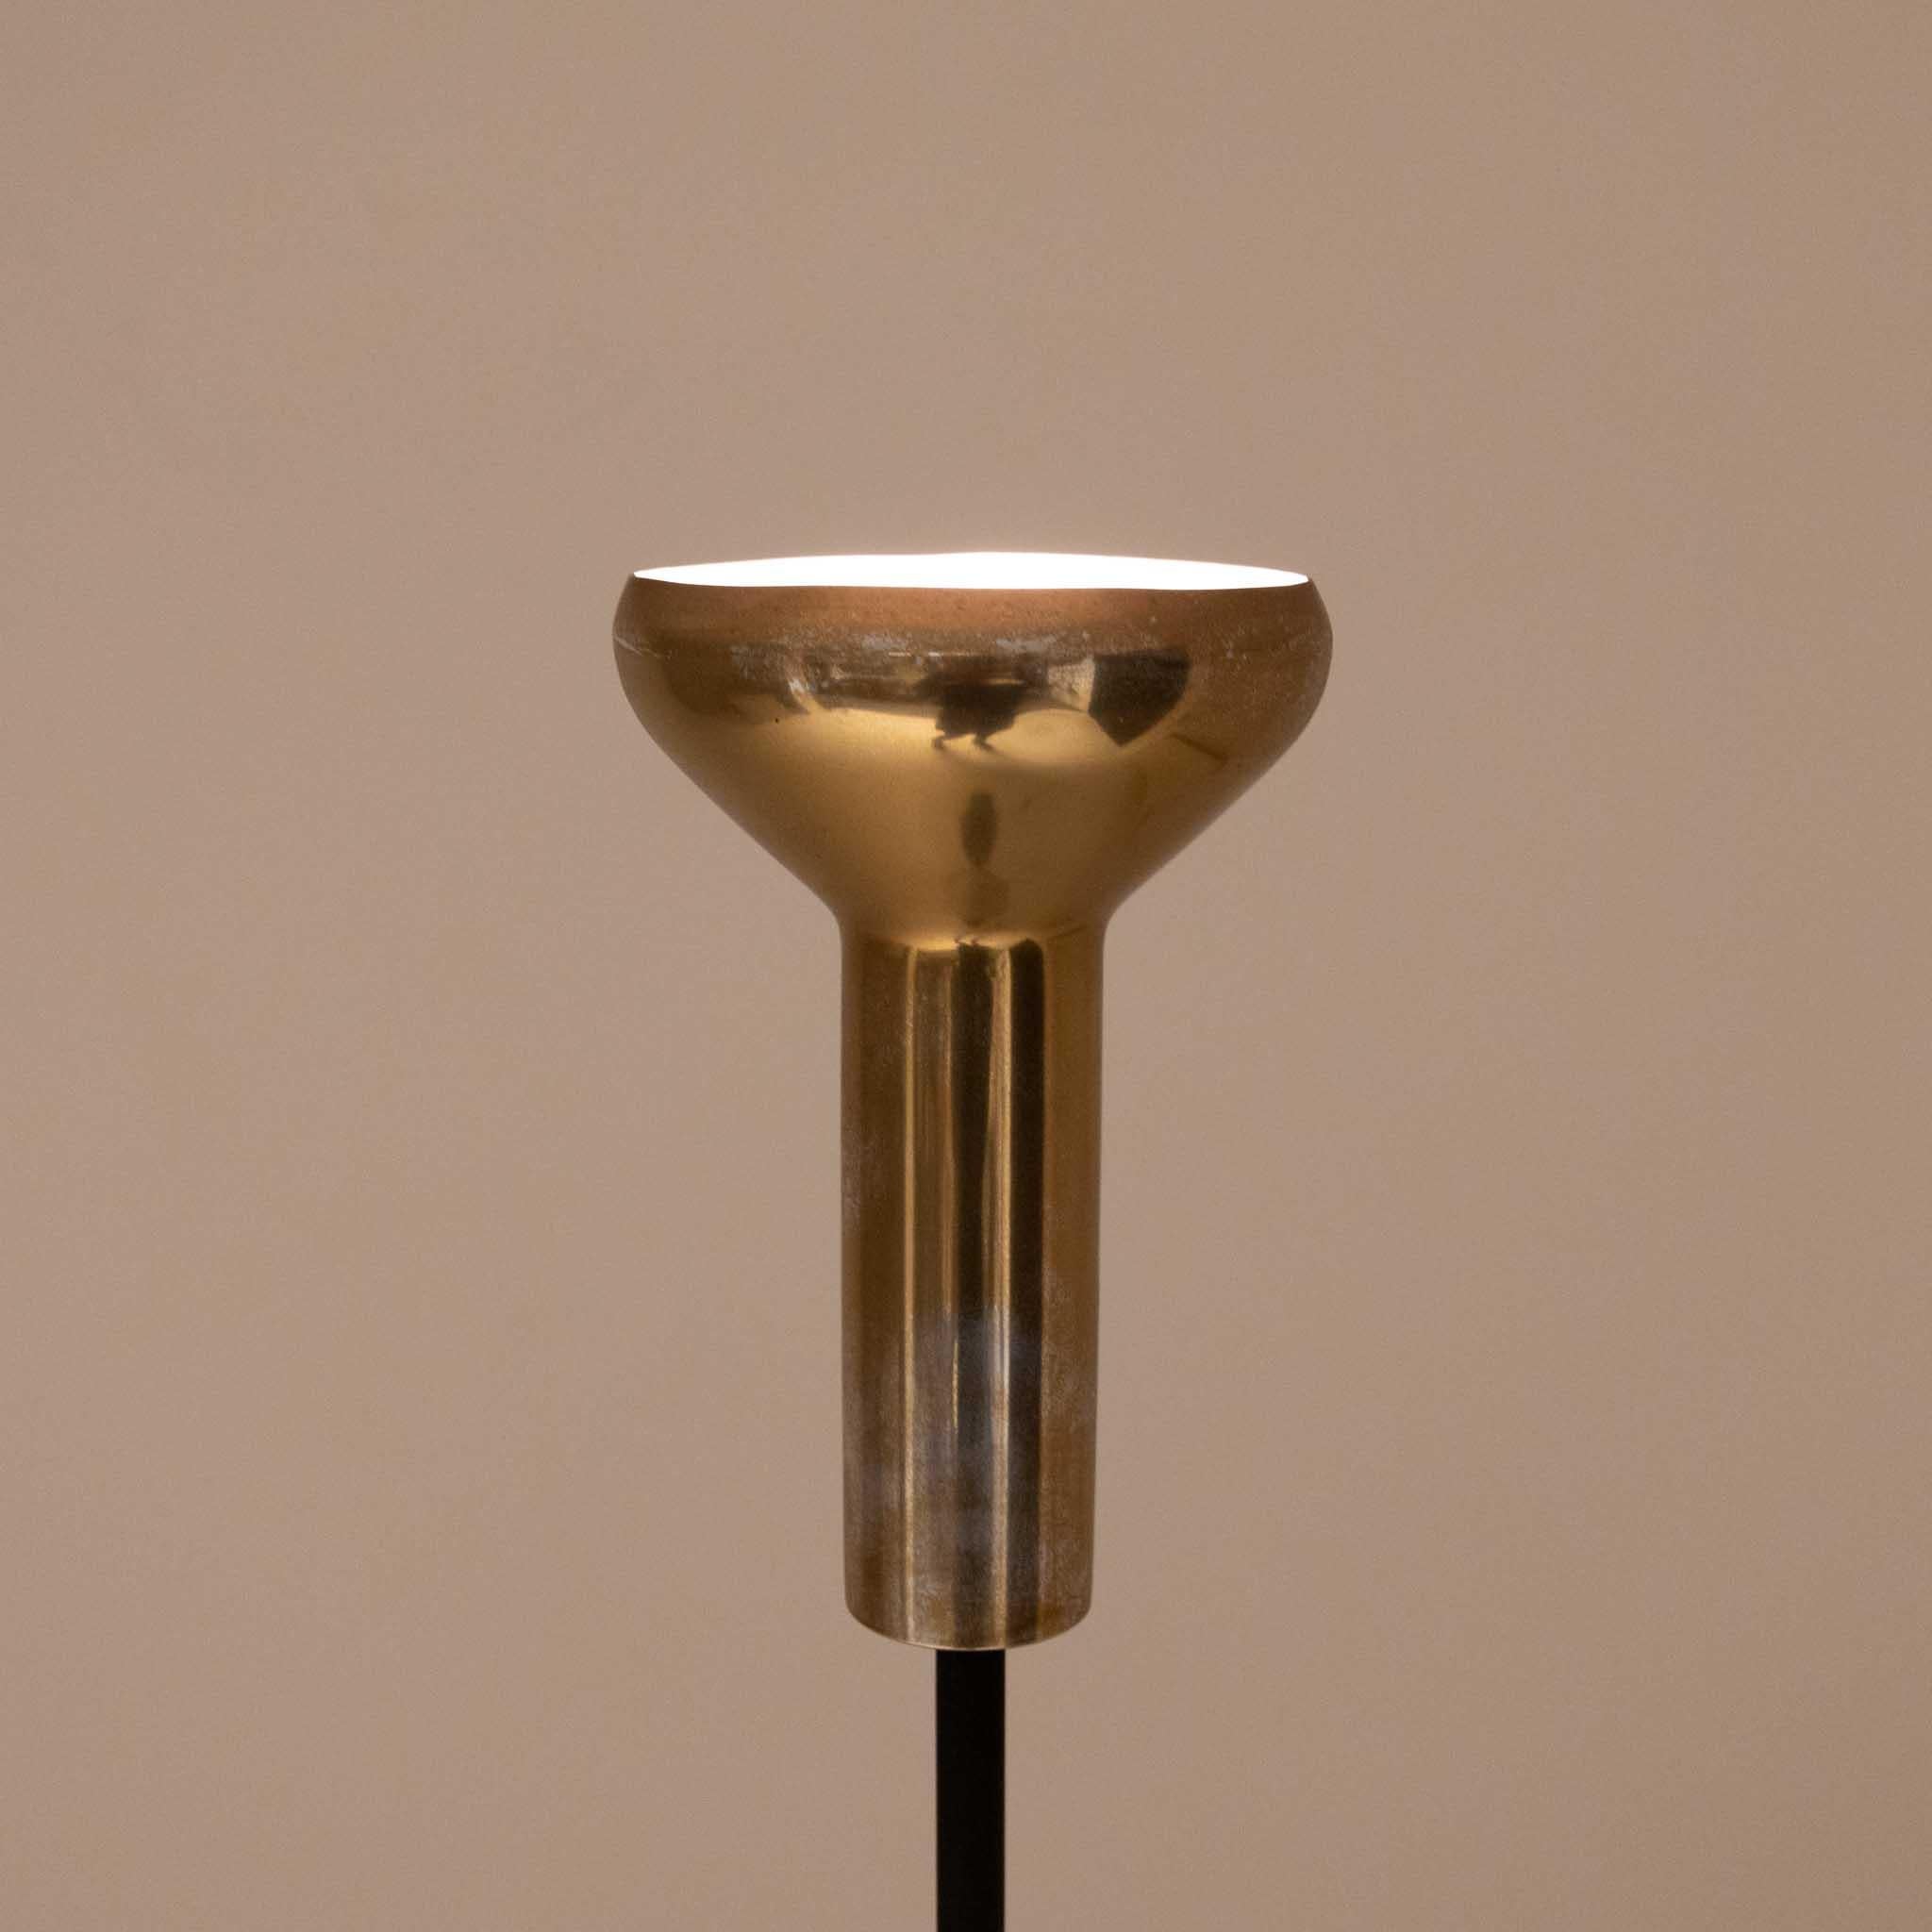 Floor lamp on a black cast-iron base, long black stem and lampshade of brass-plated aluminium (slightly rubbed). The floor lamp was designed by Gino Sarfatti for Arteluce in 1956. Cf. Lit: Clémence & Didier Krzentowski: The Complete Designers'